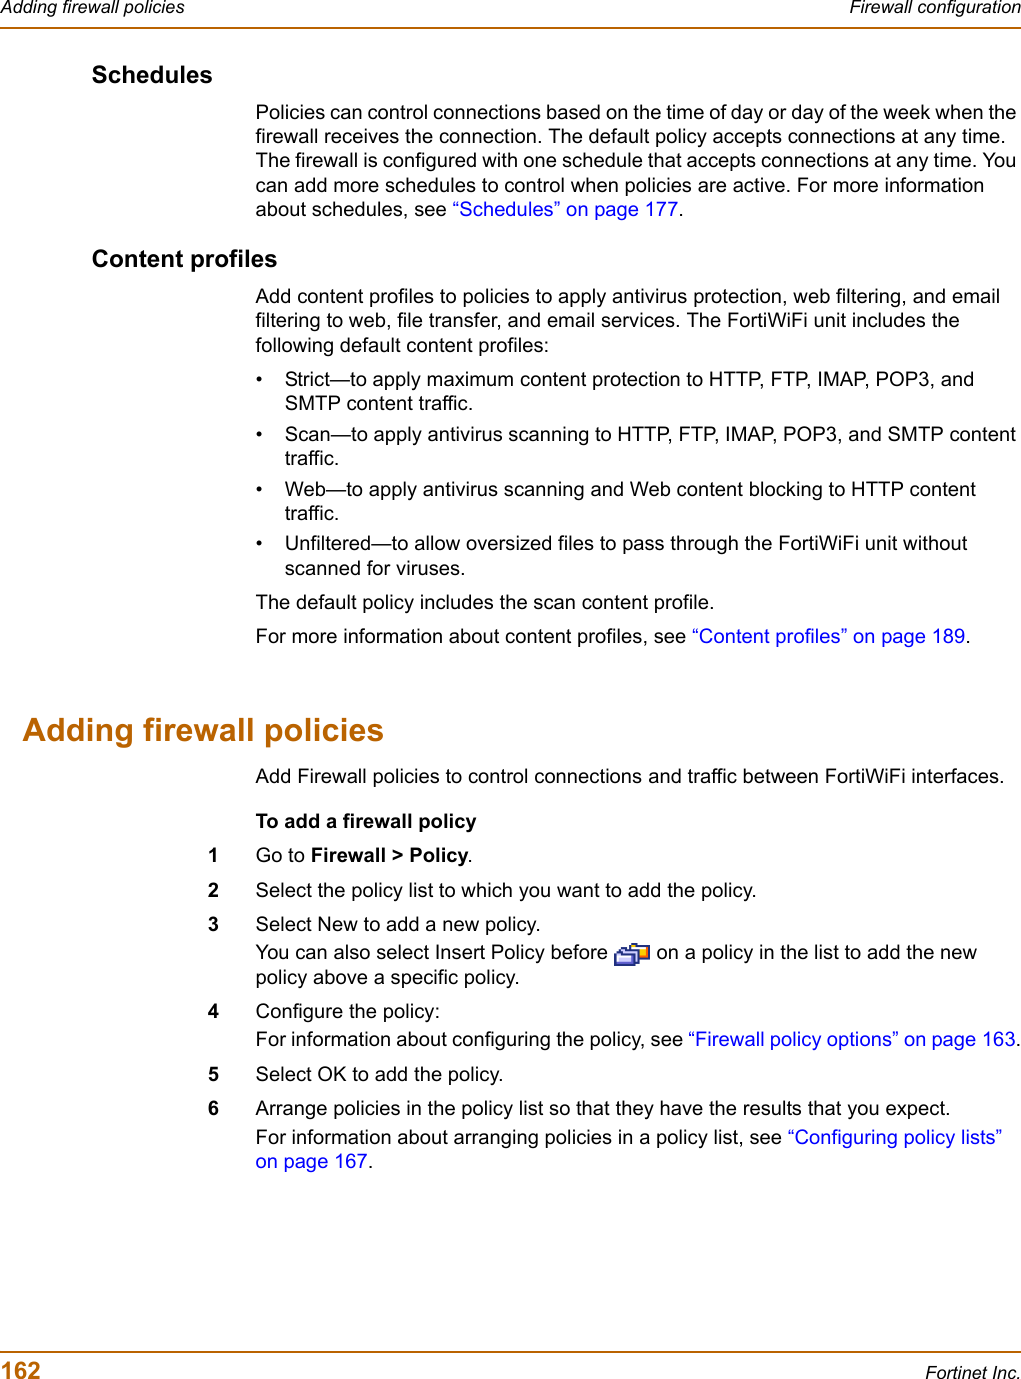 162 Fortinet Inc.Adding firewall policies Firewall configurationSchedulesPolicies can control connections based on the time of day or day of the week when the firewall receives the connection. The default policy accepts connections at any time. The firewall is configured with one schedule that accepts connections at any time. You can add more schedules to control when policies are active. For more information about schedules, see “Schedules” on page 177.Content profilesAdd content profiles to policies to apply antivirus protection, web filtering, and email filtering to web, file transfer, and email services. The FortiWiFi unit includes the following default content profiles:• Strict—to apply maximum content protection to HTTP, FTP, IMAP, POP3, and SMTP content traffic.• Scan—to apply antivirus scanning to HTTP, FTP, IMAP, POP3, and SMTP content traffic.• Web—to apply antivirus scanning and Web content blocking to HTTP content traffic.• Unfiltered—to allow oversized files to pass through the FortiWiFi unit without scanned for viruses.The default policy includes the scan content profile.For more information about content profiles, see “Content profiles” on page 189.Adding firewall policiesAdd Firewall policies to control connections and traffic between FortiWiFi interfaces.To add a firewall policy1Go to Firewall &gt; Policy.2Select the policy list to which you want to add the policy.3Select New to add a new policy.You can also select Insert Policy before   on a policy in the list to add the new policy above a specific policy.4Configure the policy:For information about configuring the policy, see “Firewall policy options” on page 163.5Select OK to add the policy.6Arrange policies in the policy list so that they have the results that you expect.For information about arranging policies in a policy list, see “Configuring policy lists” on page 167.